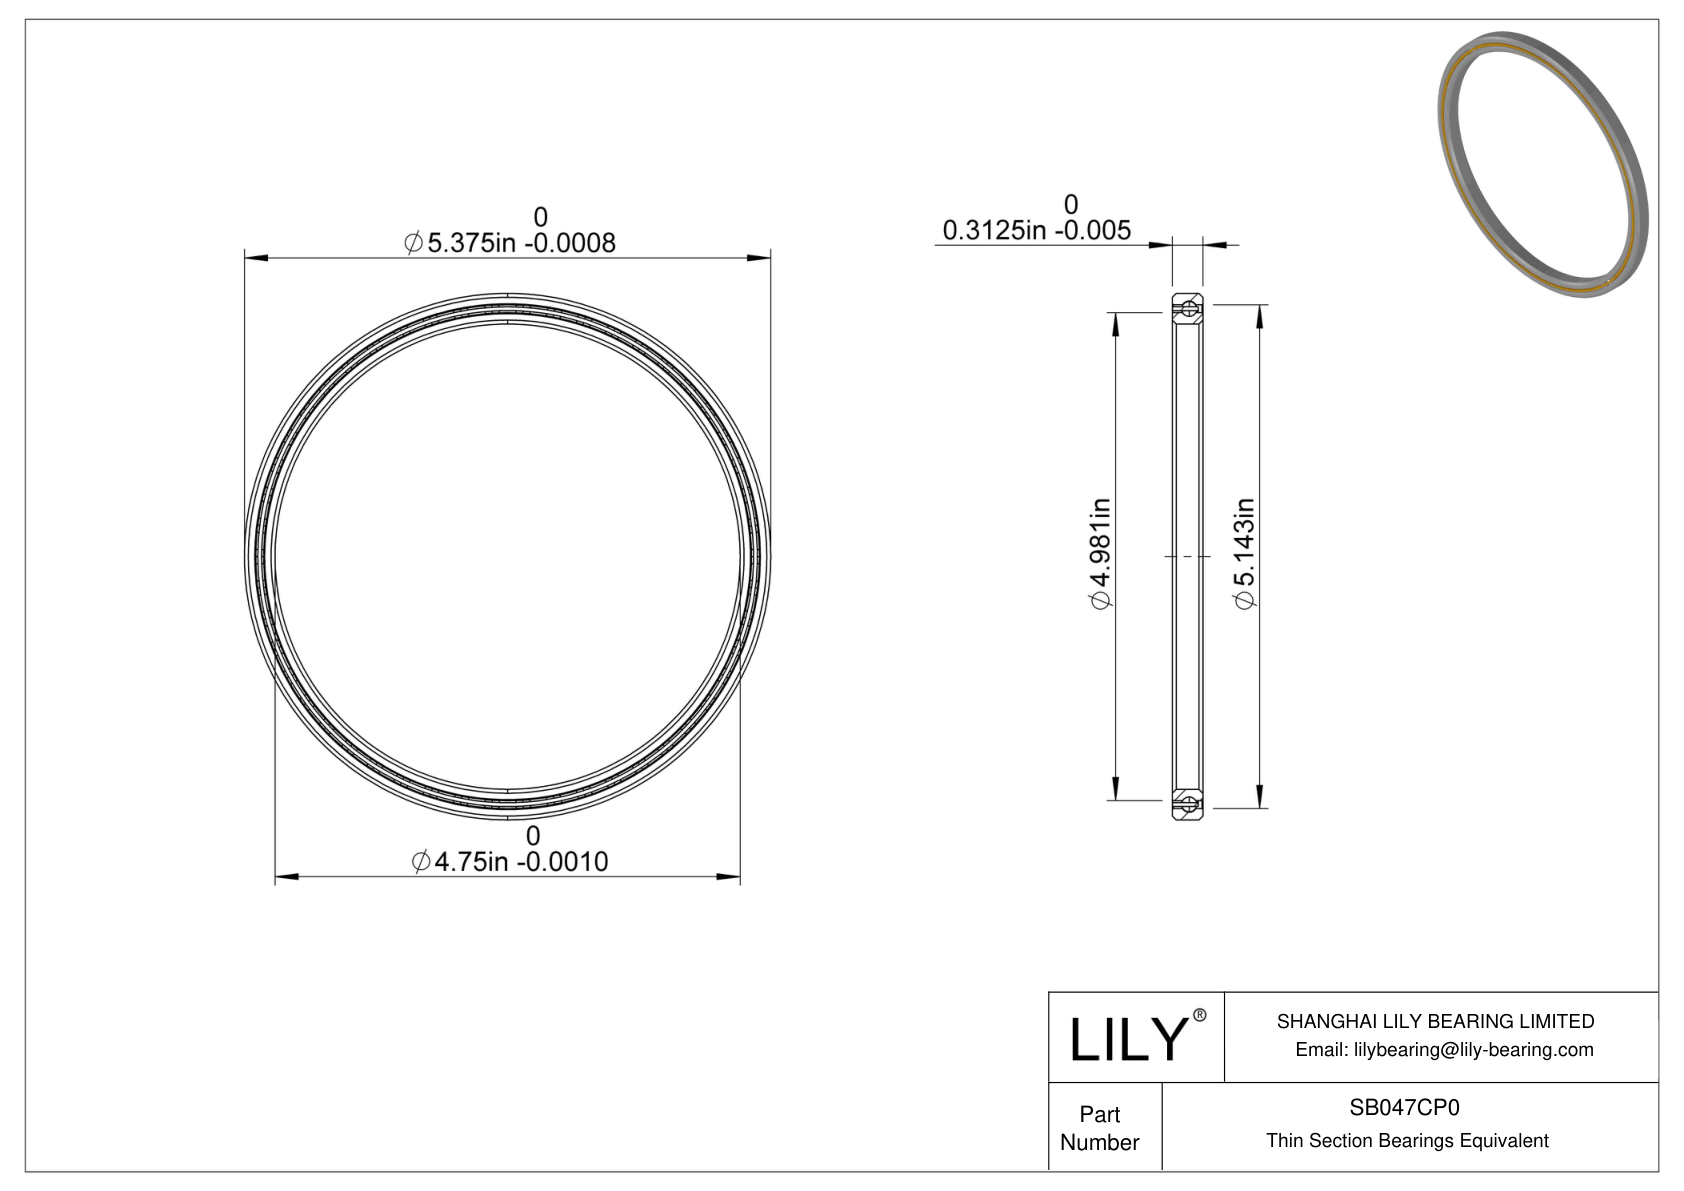 SB047CP0 Constant Section (CS) Bearings cad drawing